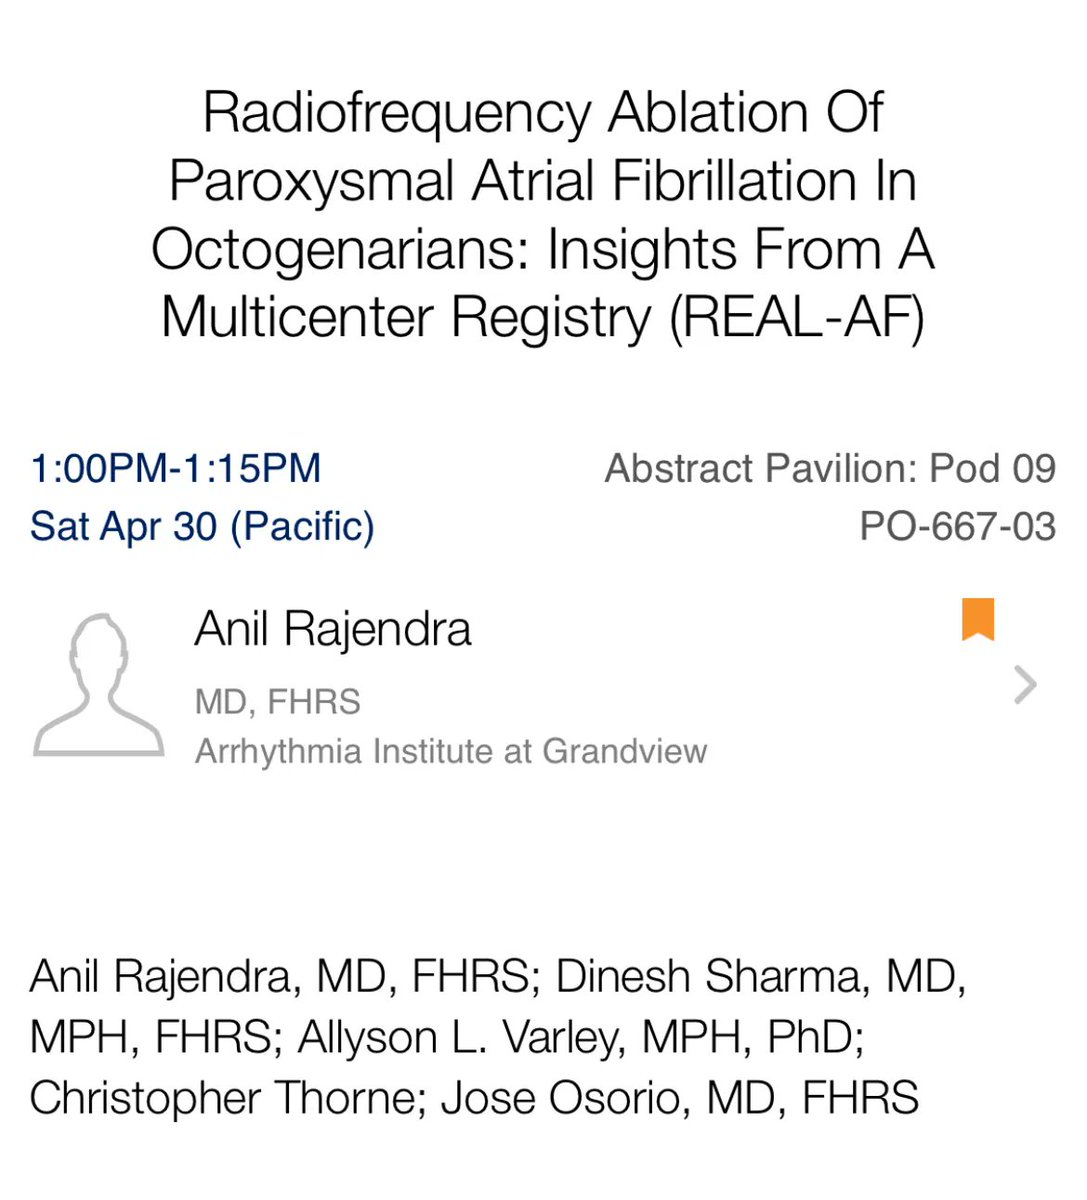 Attending #HRS2022? Check out @AnilRajendra1’s presentation titled, “Radiofrequency Ablation of Paroxysmal Atrial Fibrillation In Octogenarians: Insights From A Multicenter Registry (#REALAF)” at 1:00pm on Saturday April 30. @DineshSharmaEP @josoriomd